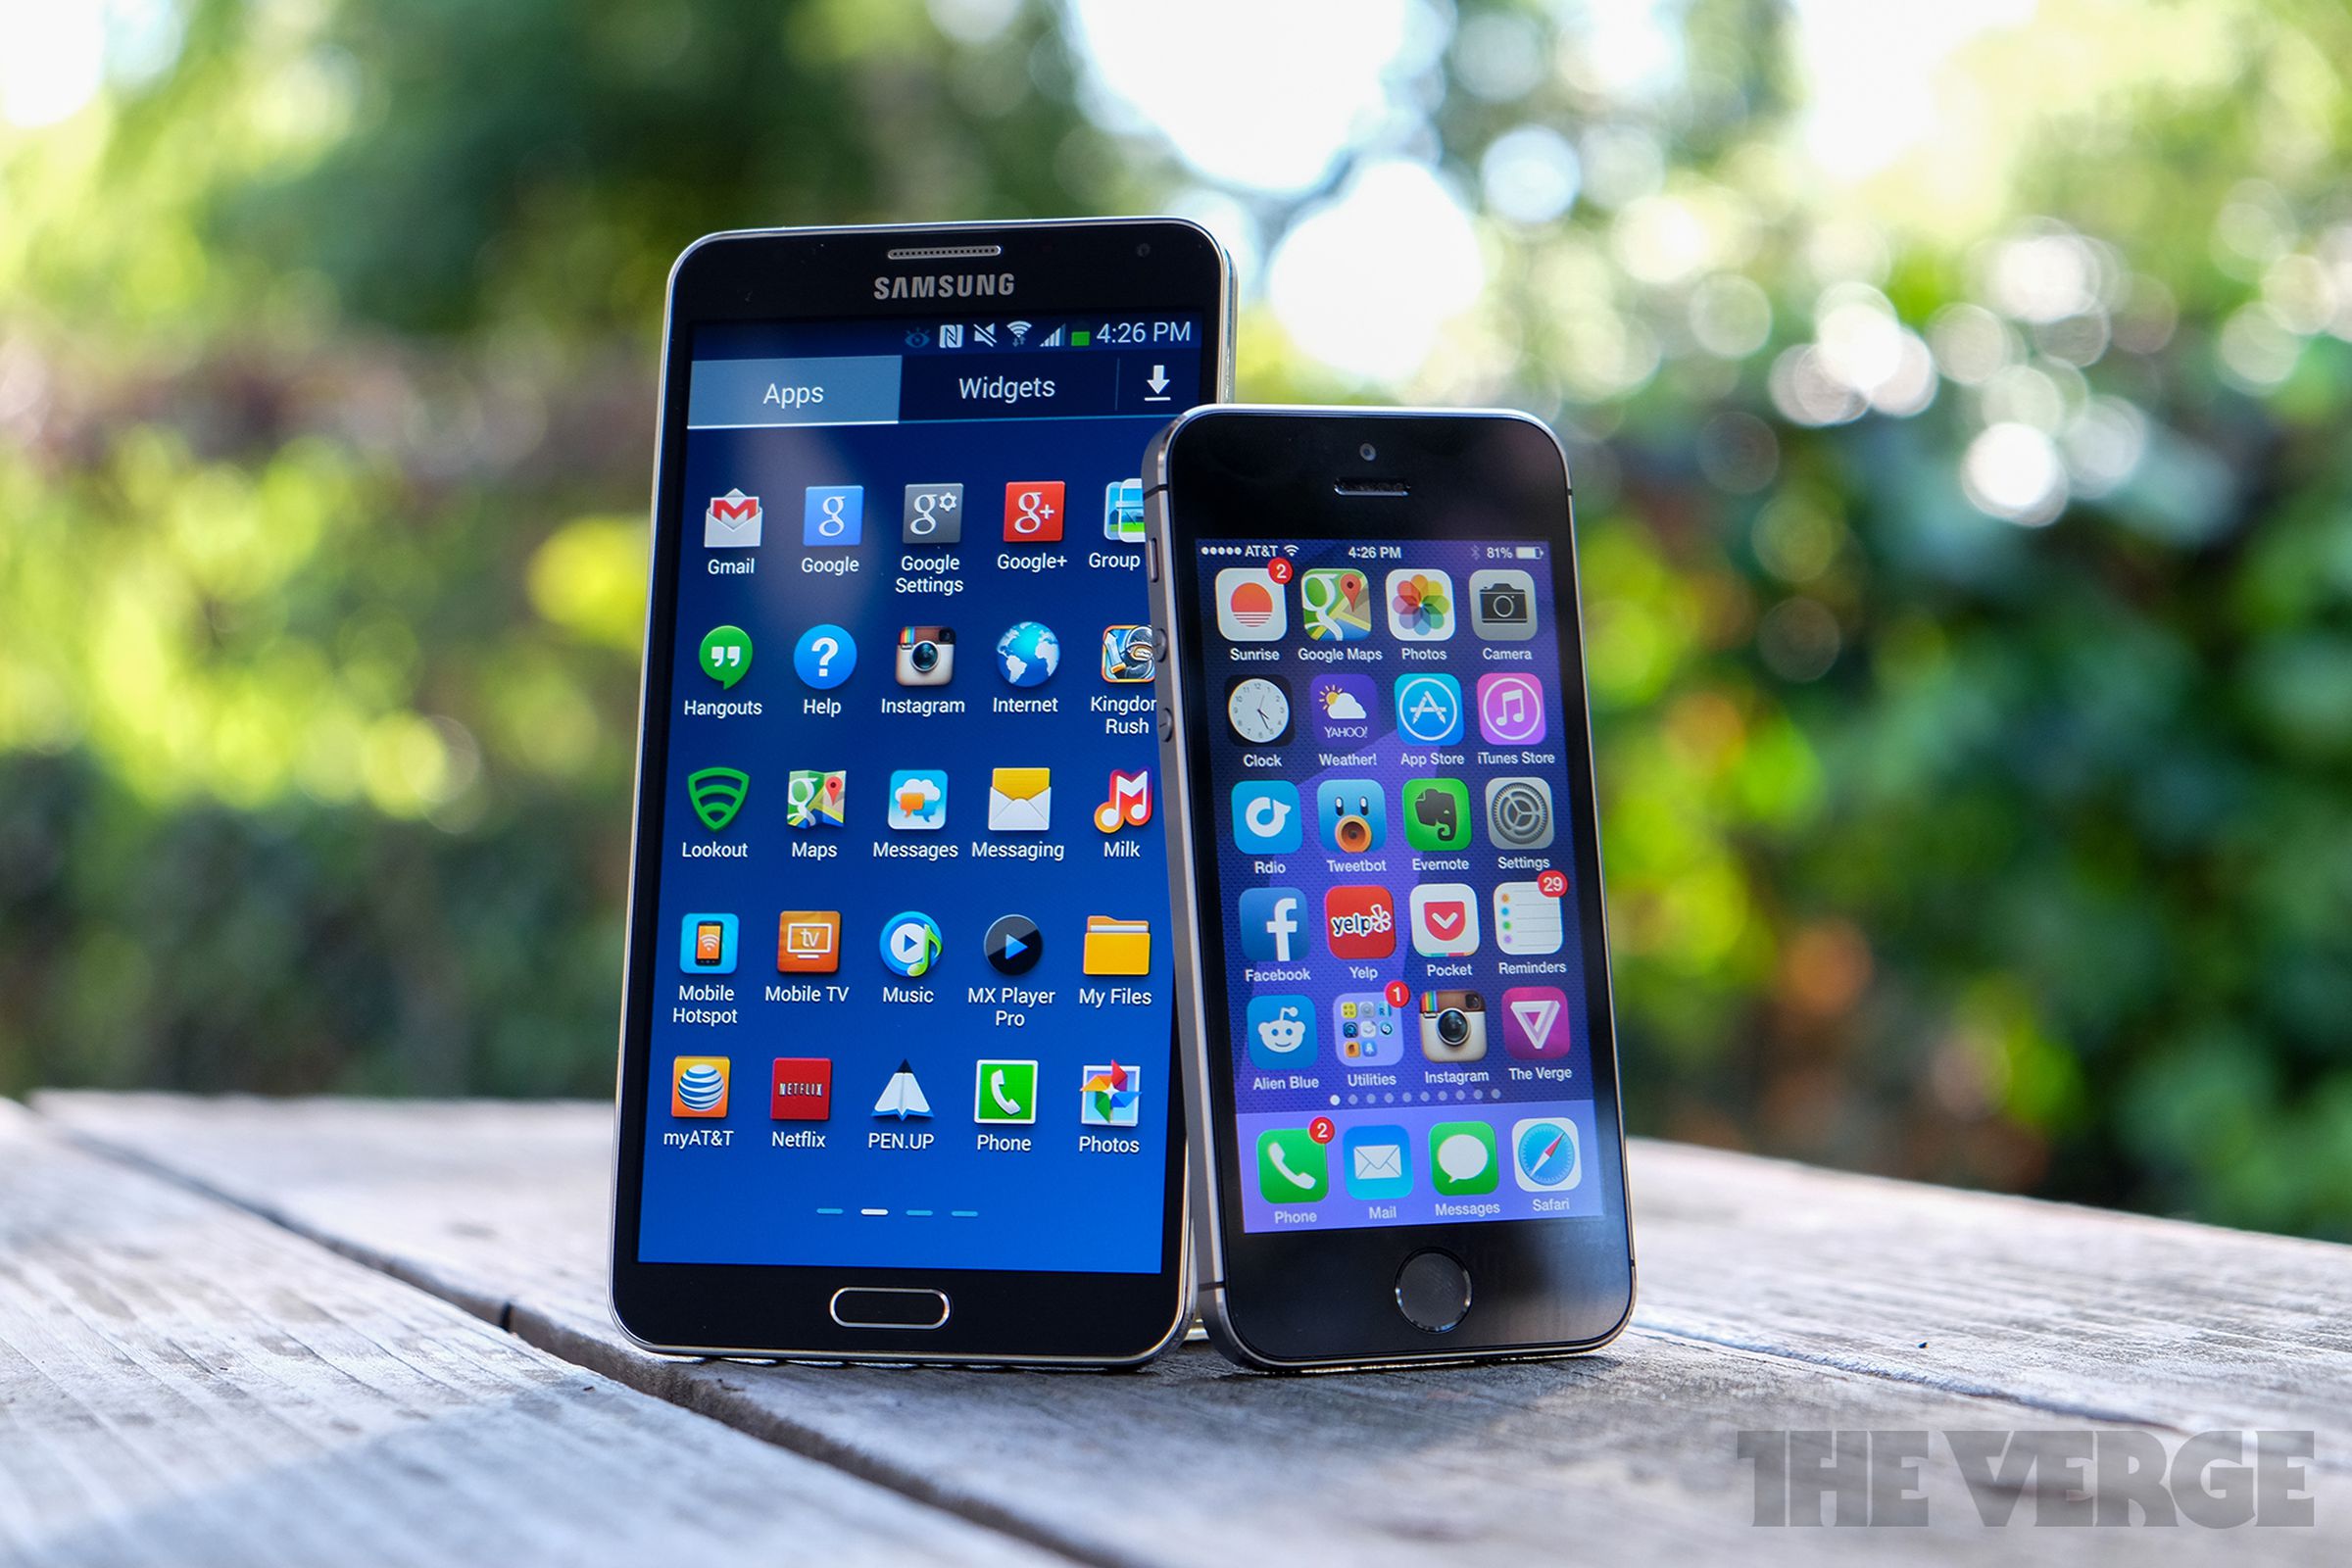 Samsung Galaxy Note 3 and iPhone 5S (stock)